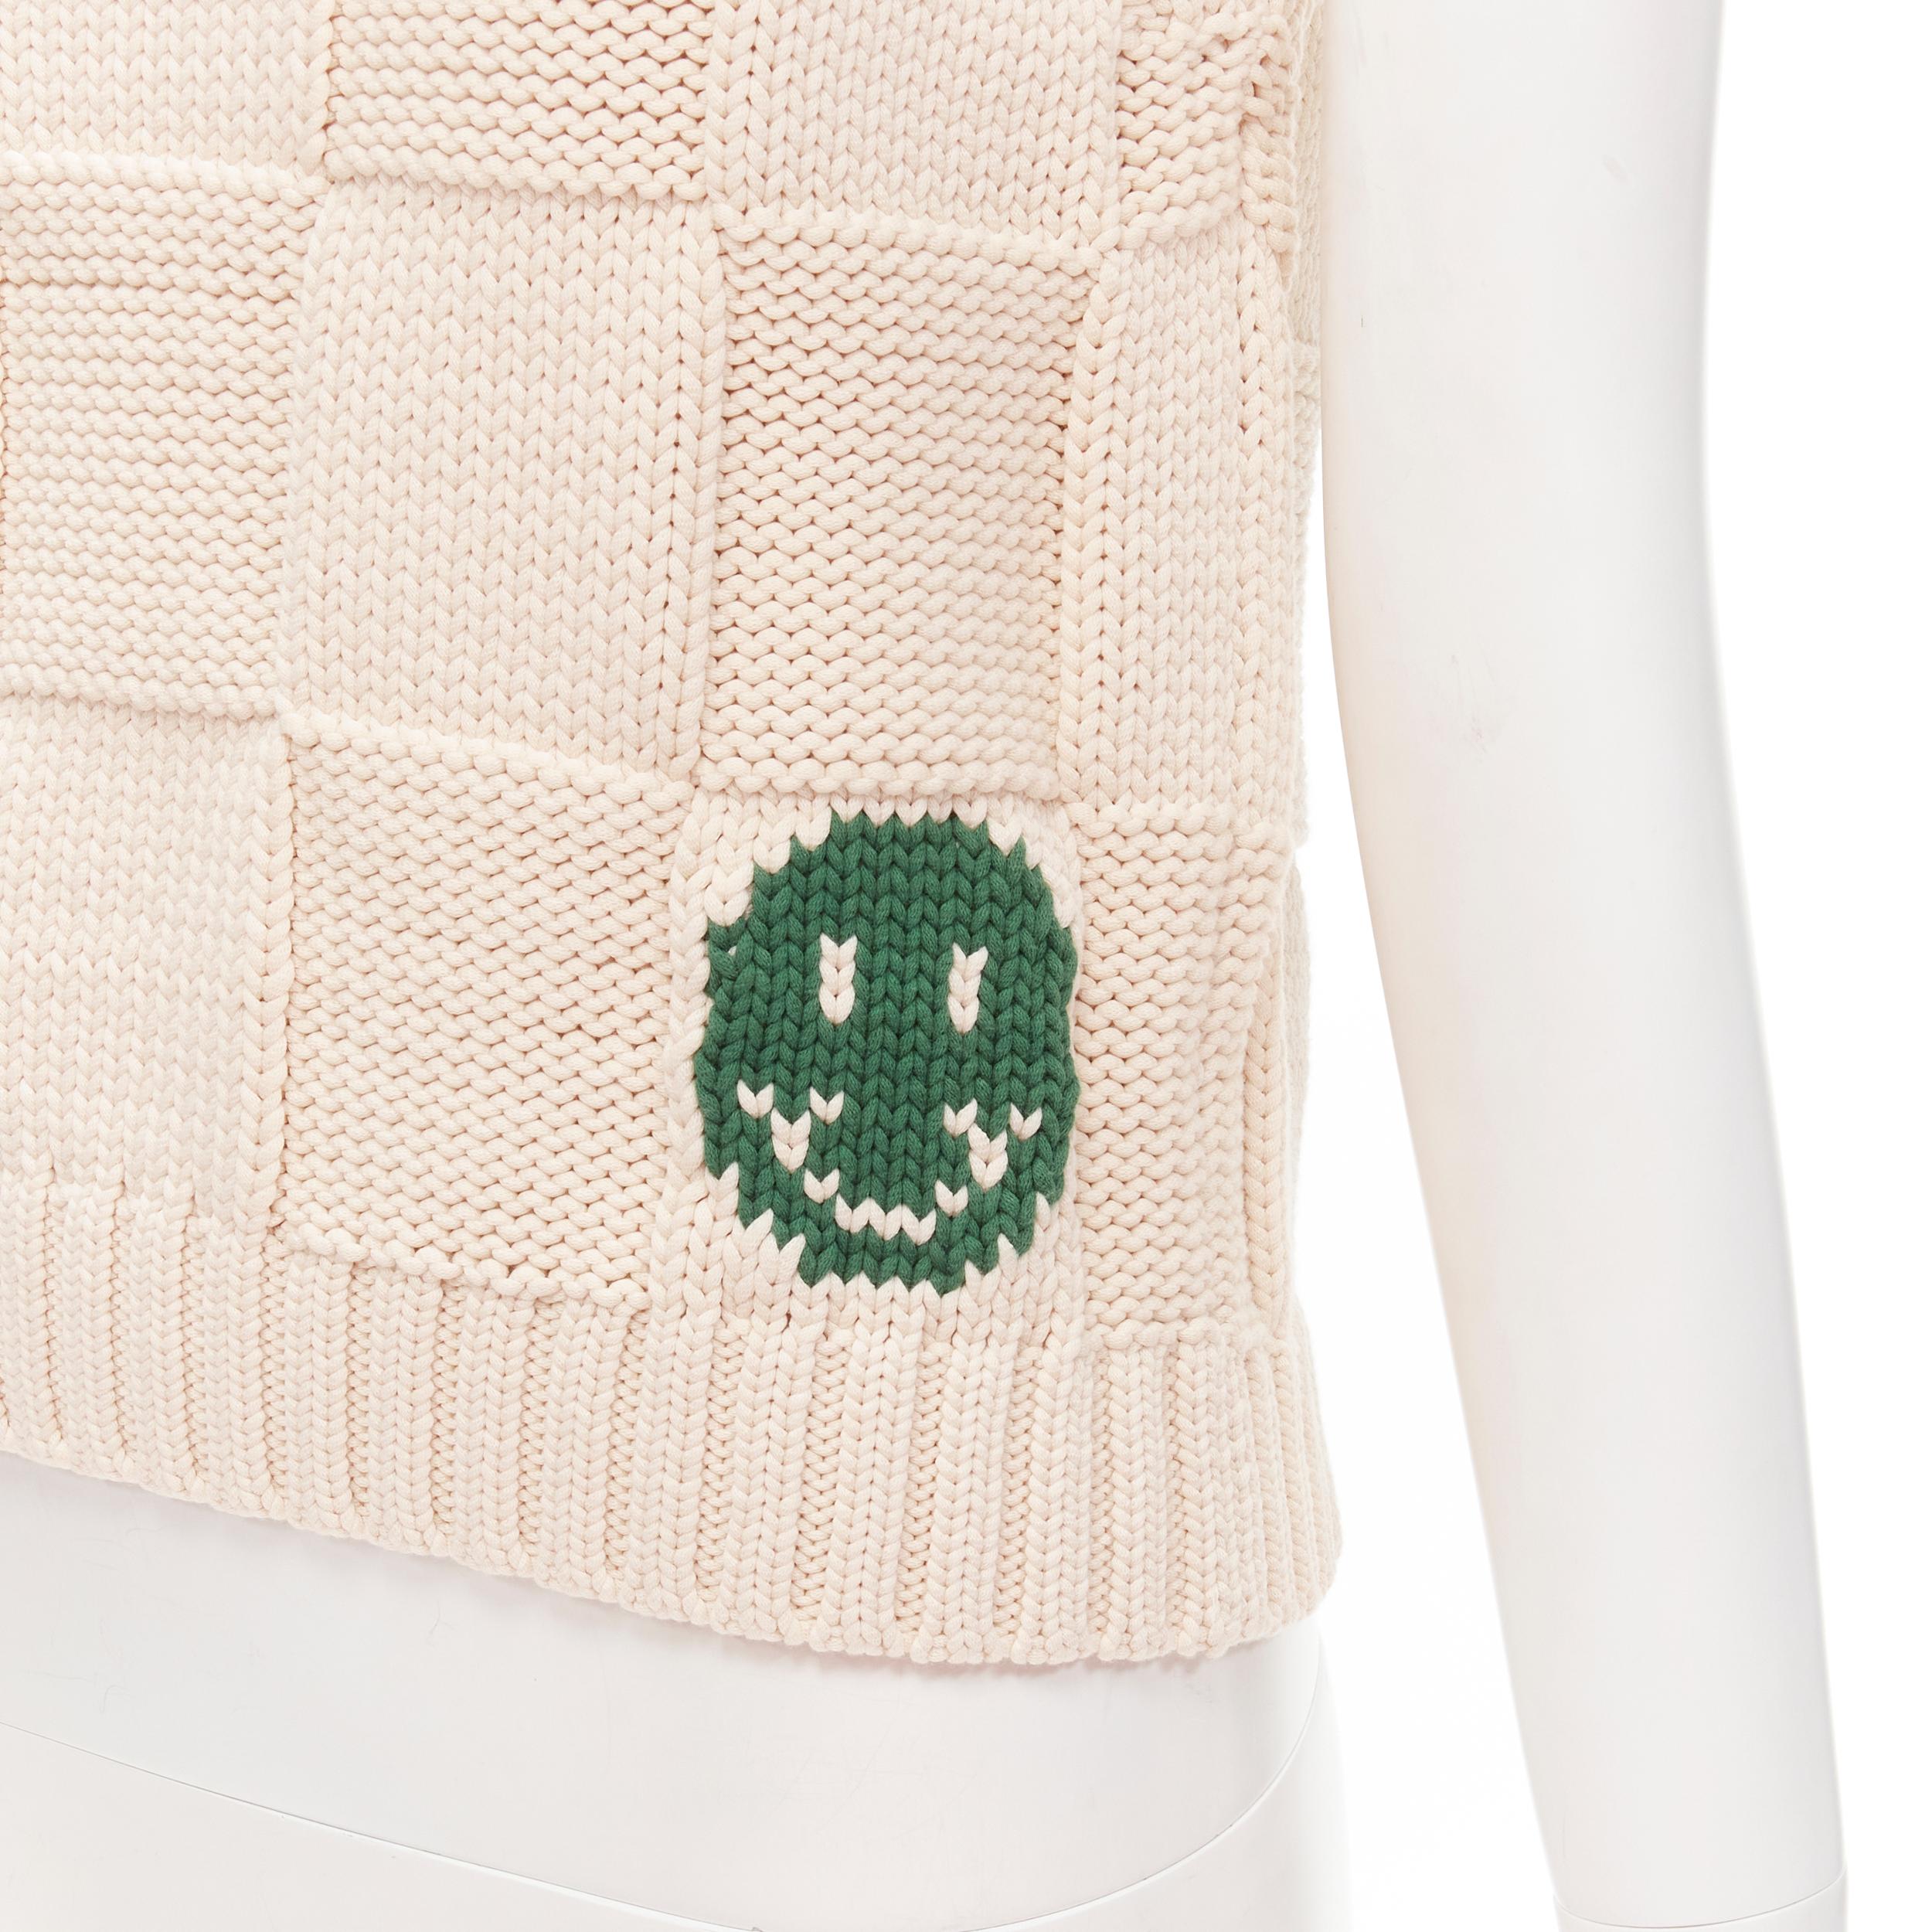 GANNI green smiley face checkered weave sleeveless vest XS 
Reference: ANWU/A00418 
Brand: Ganni 
Material: Wool 
Color: Beige 
Pattern: Solid 
Extra Detail: Button at shoulder. Green smiley face knitted at front hem. 

CONDITION: 
Condition: